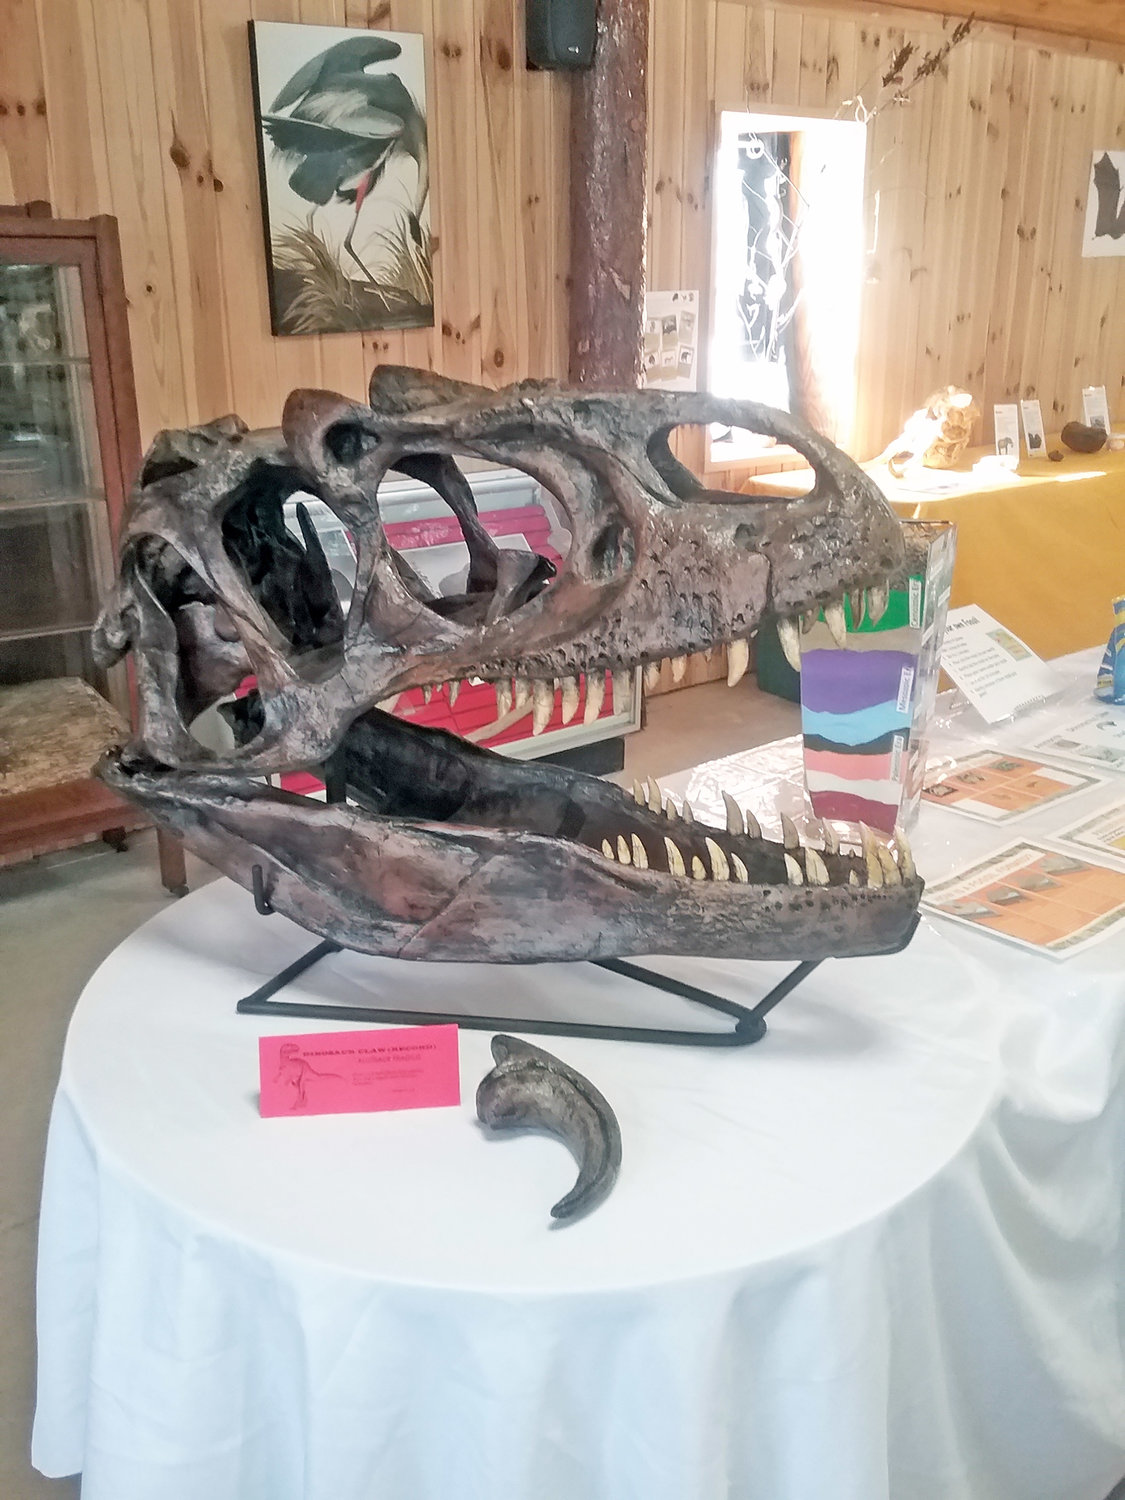 The Great Swamp Conservancy’s fossil exhibit is on display through March 10.